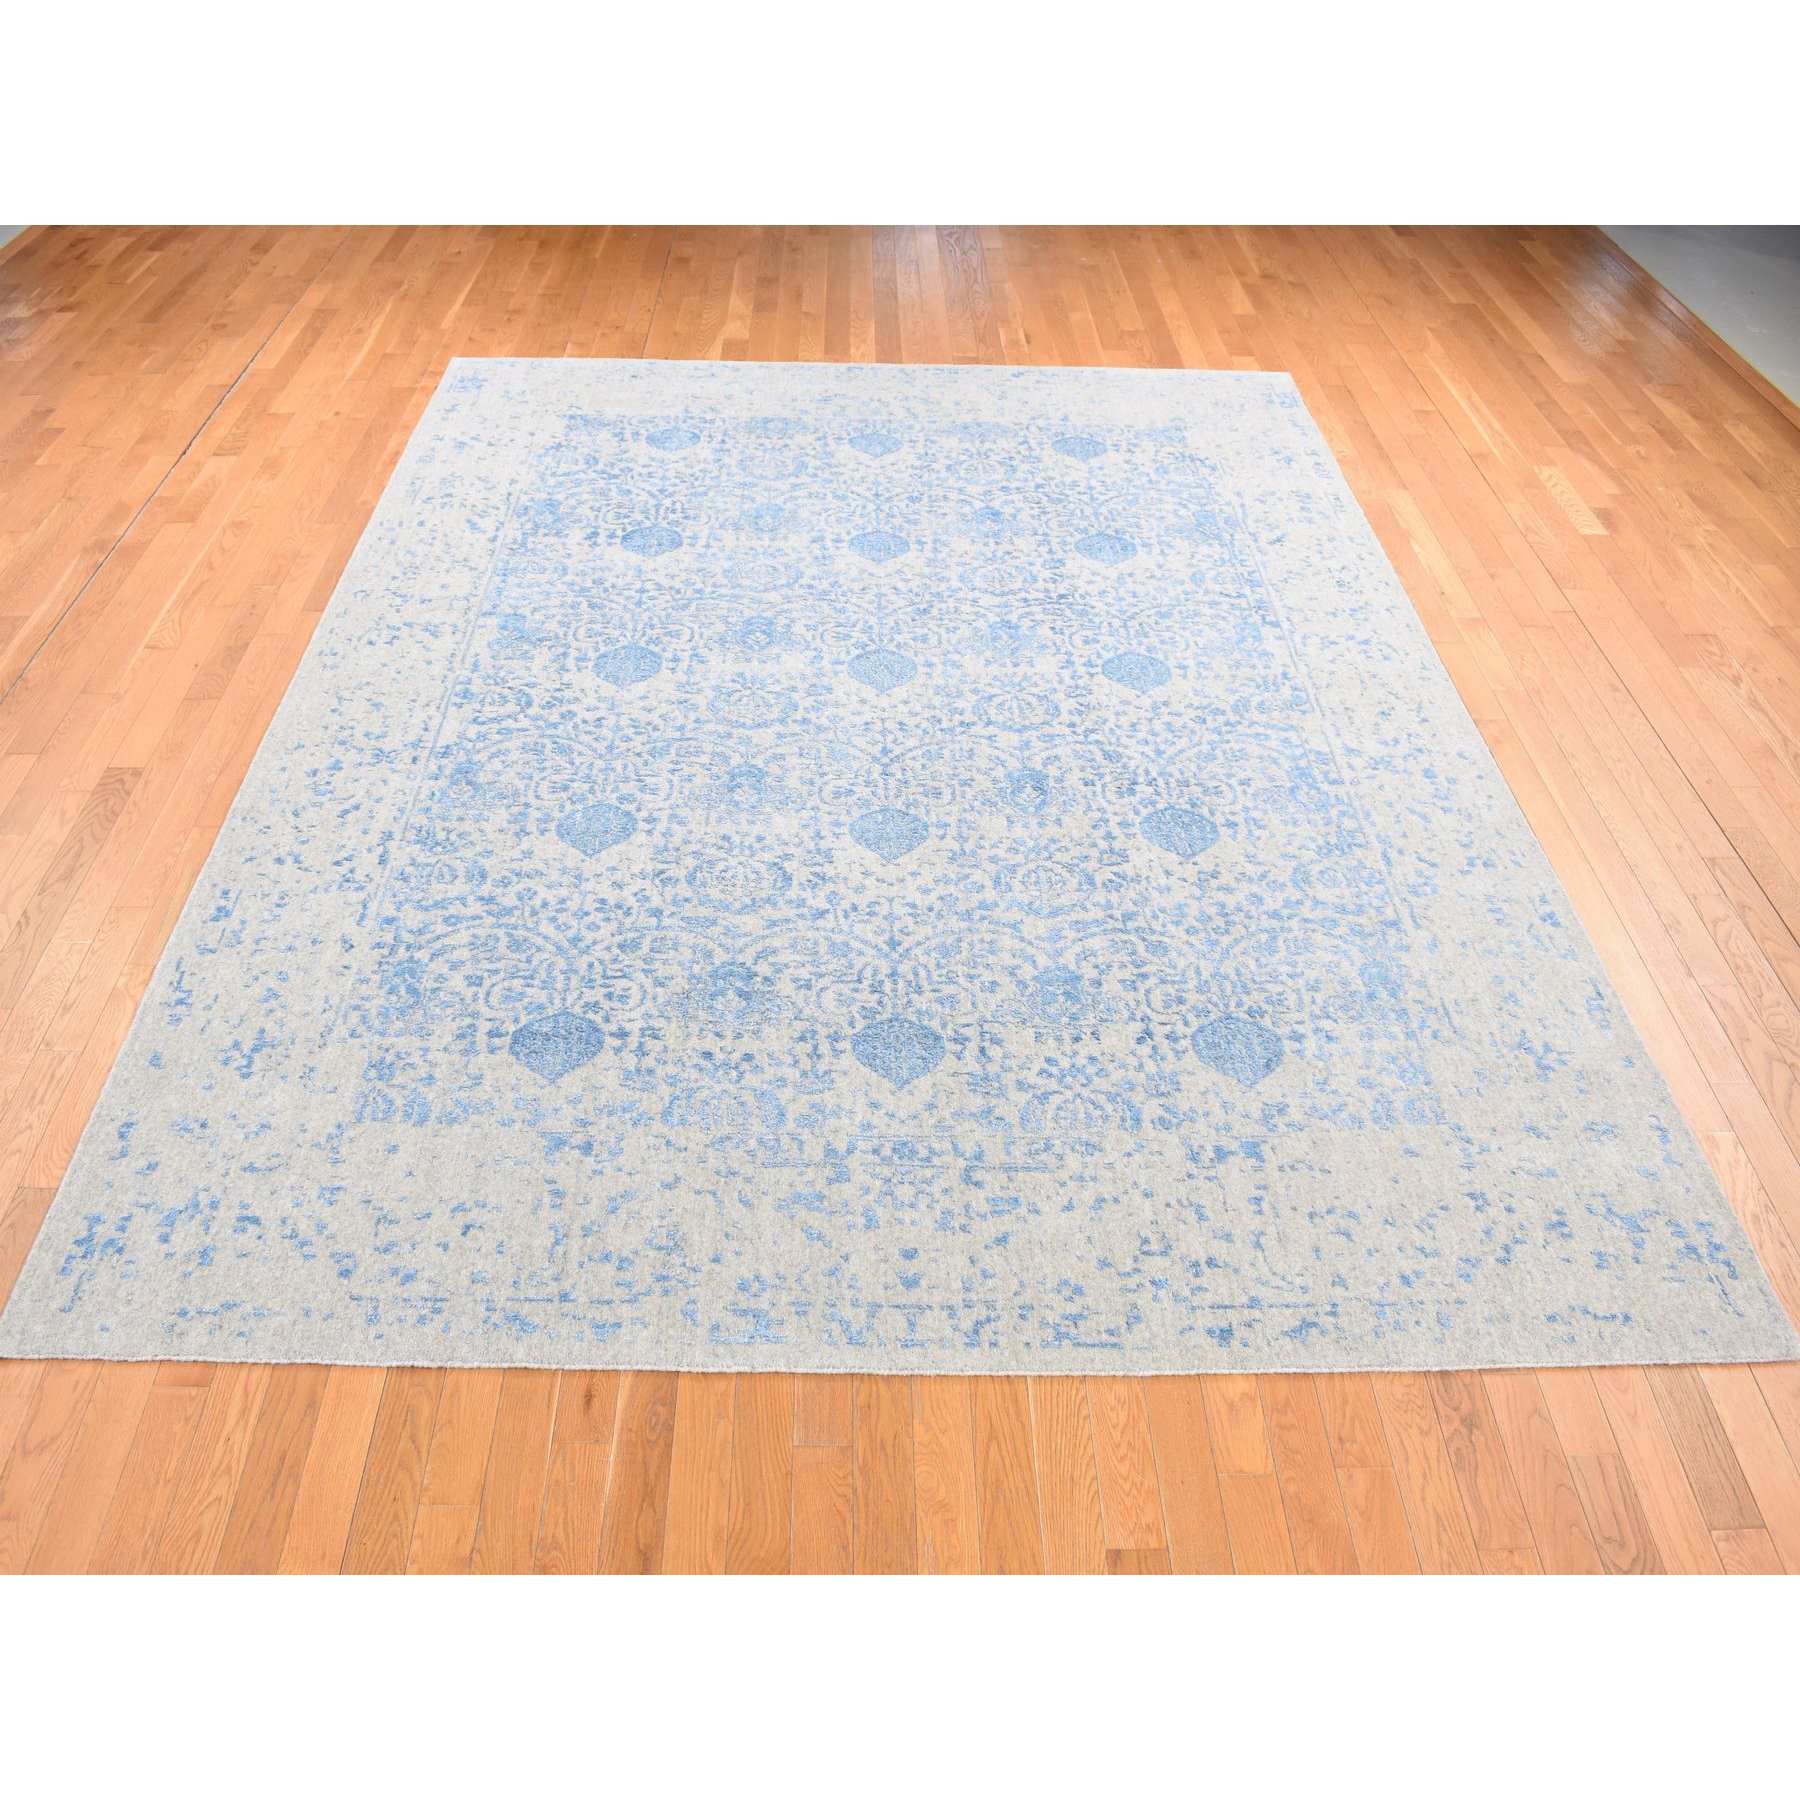 Modern-and-Contemporary-Hand-Loomed-Rug-403985